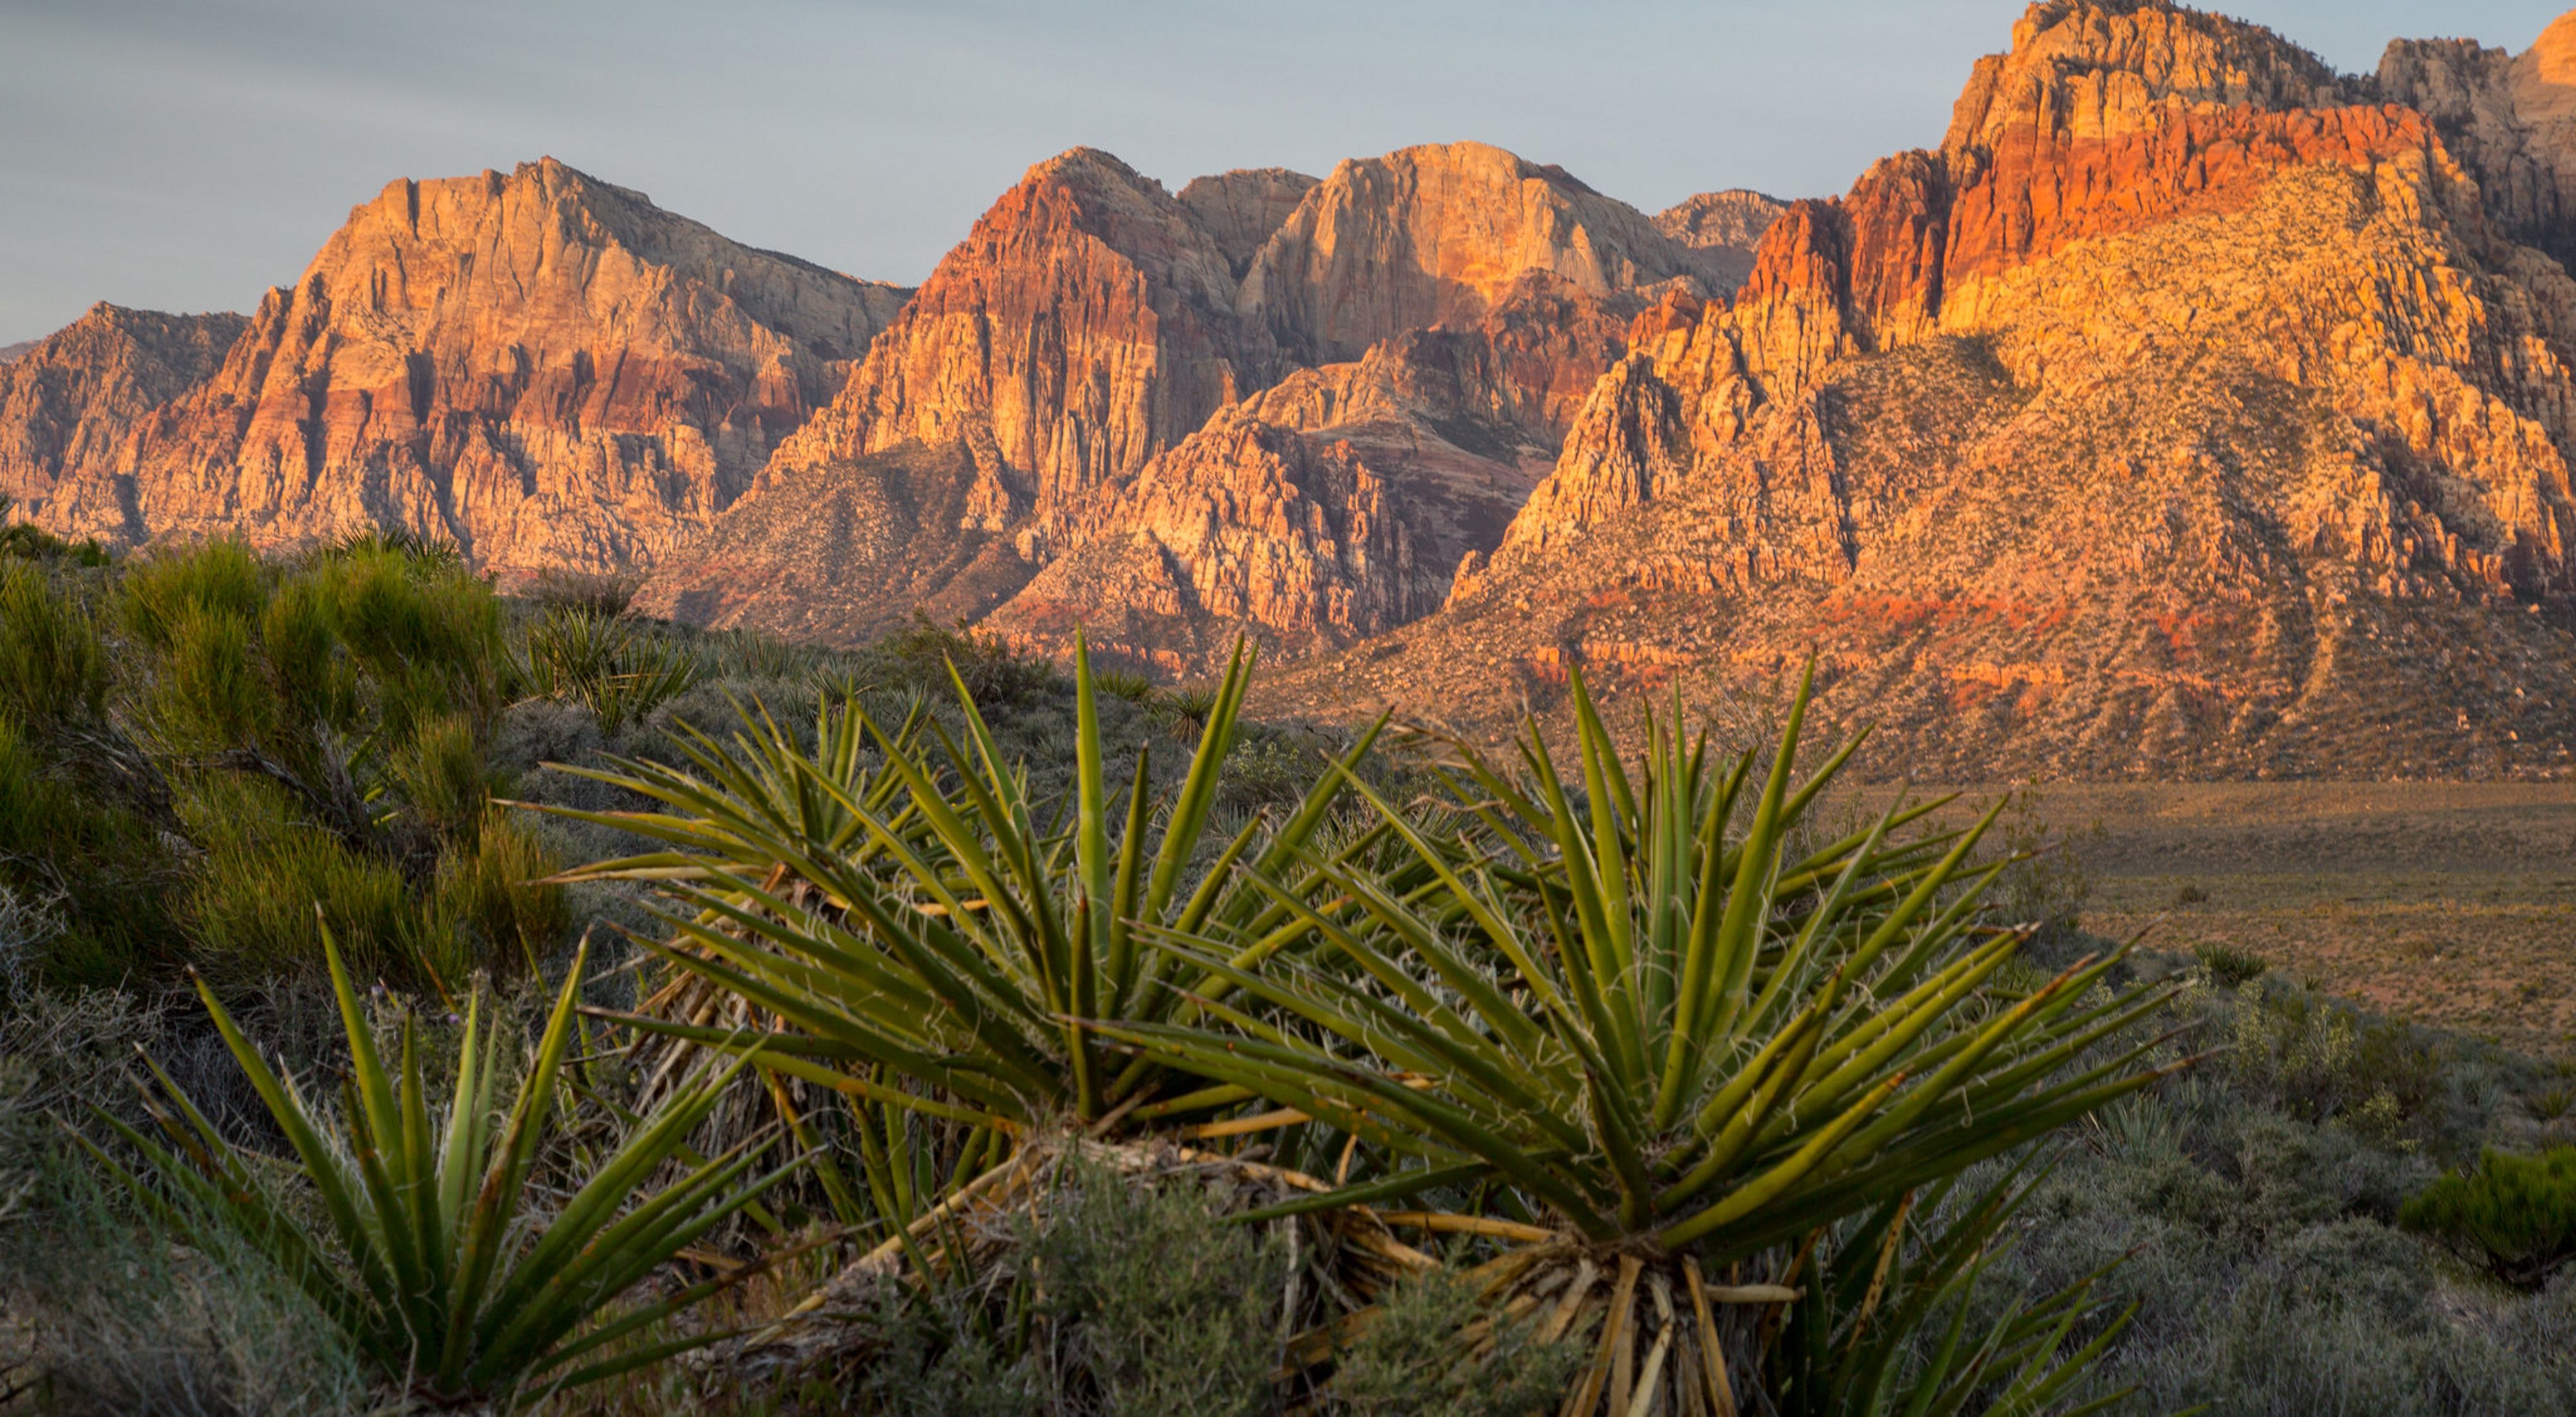 A photo of mountains in the sunrise with yucca in the foreground.